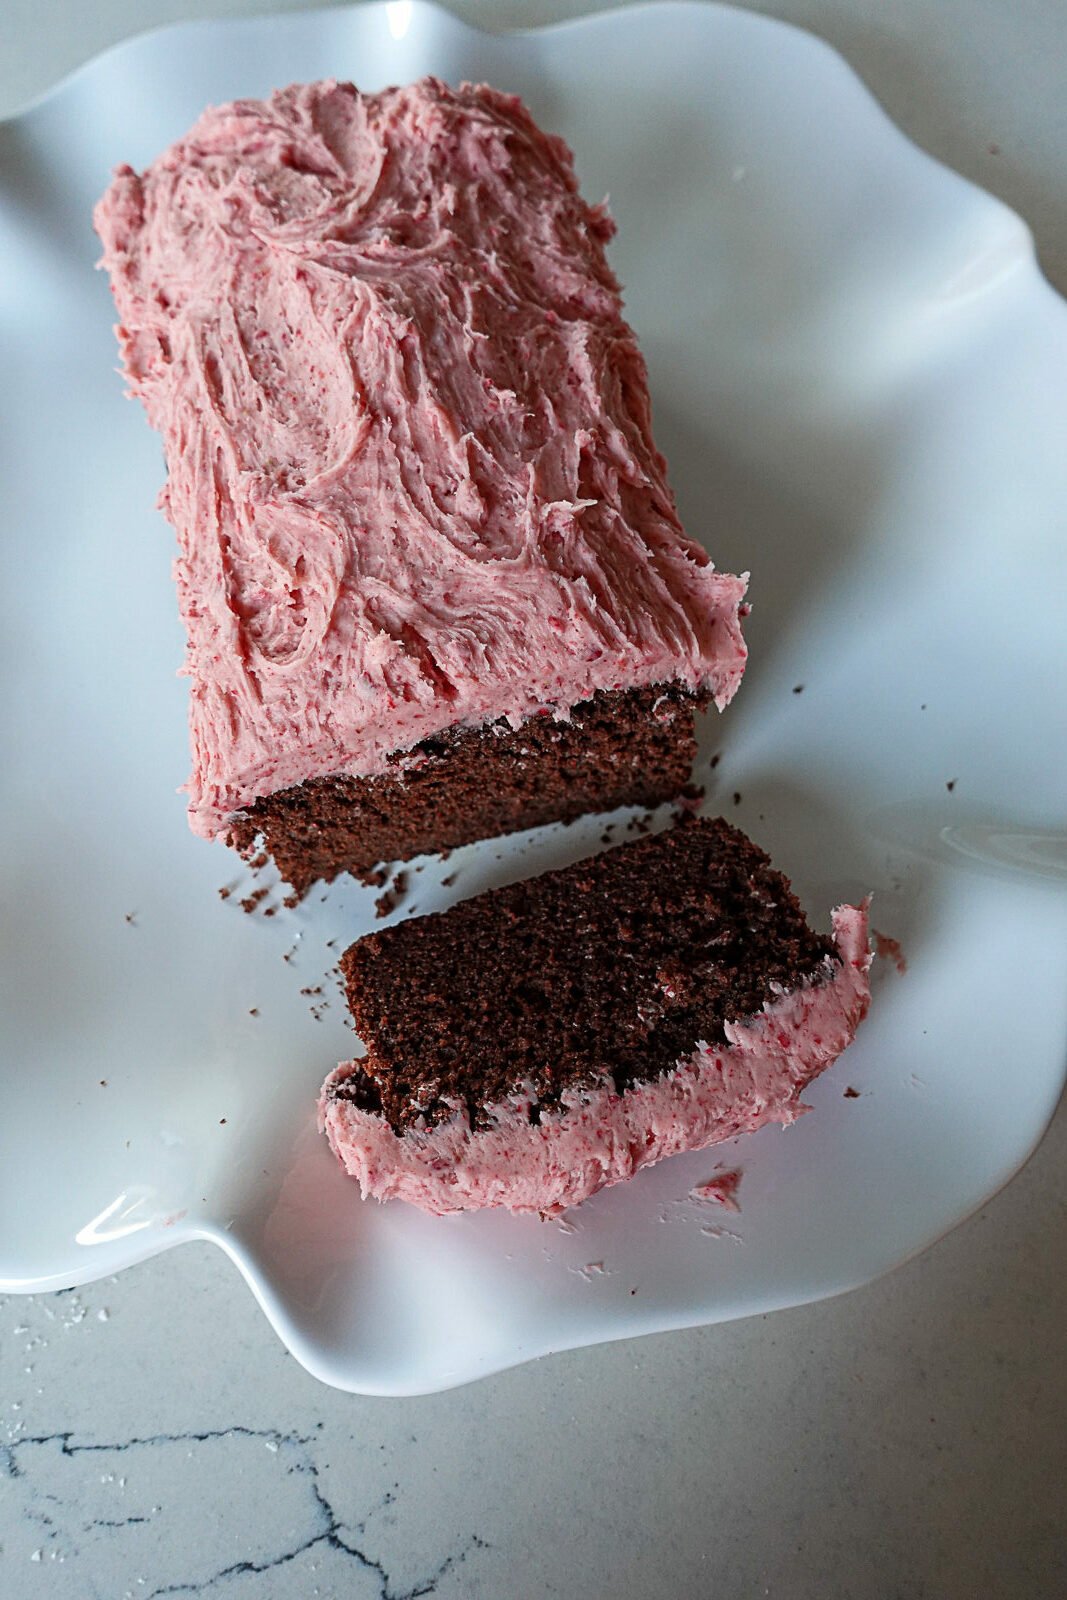 Chocolate Loaf with Frosting